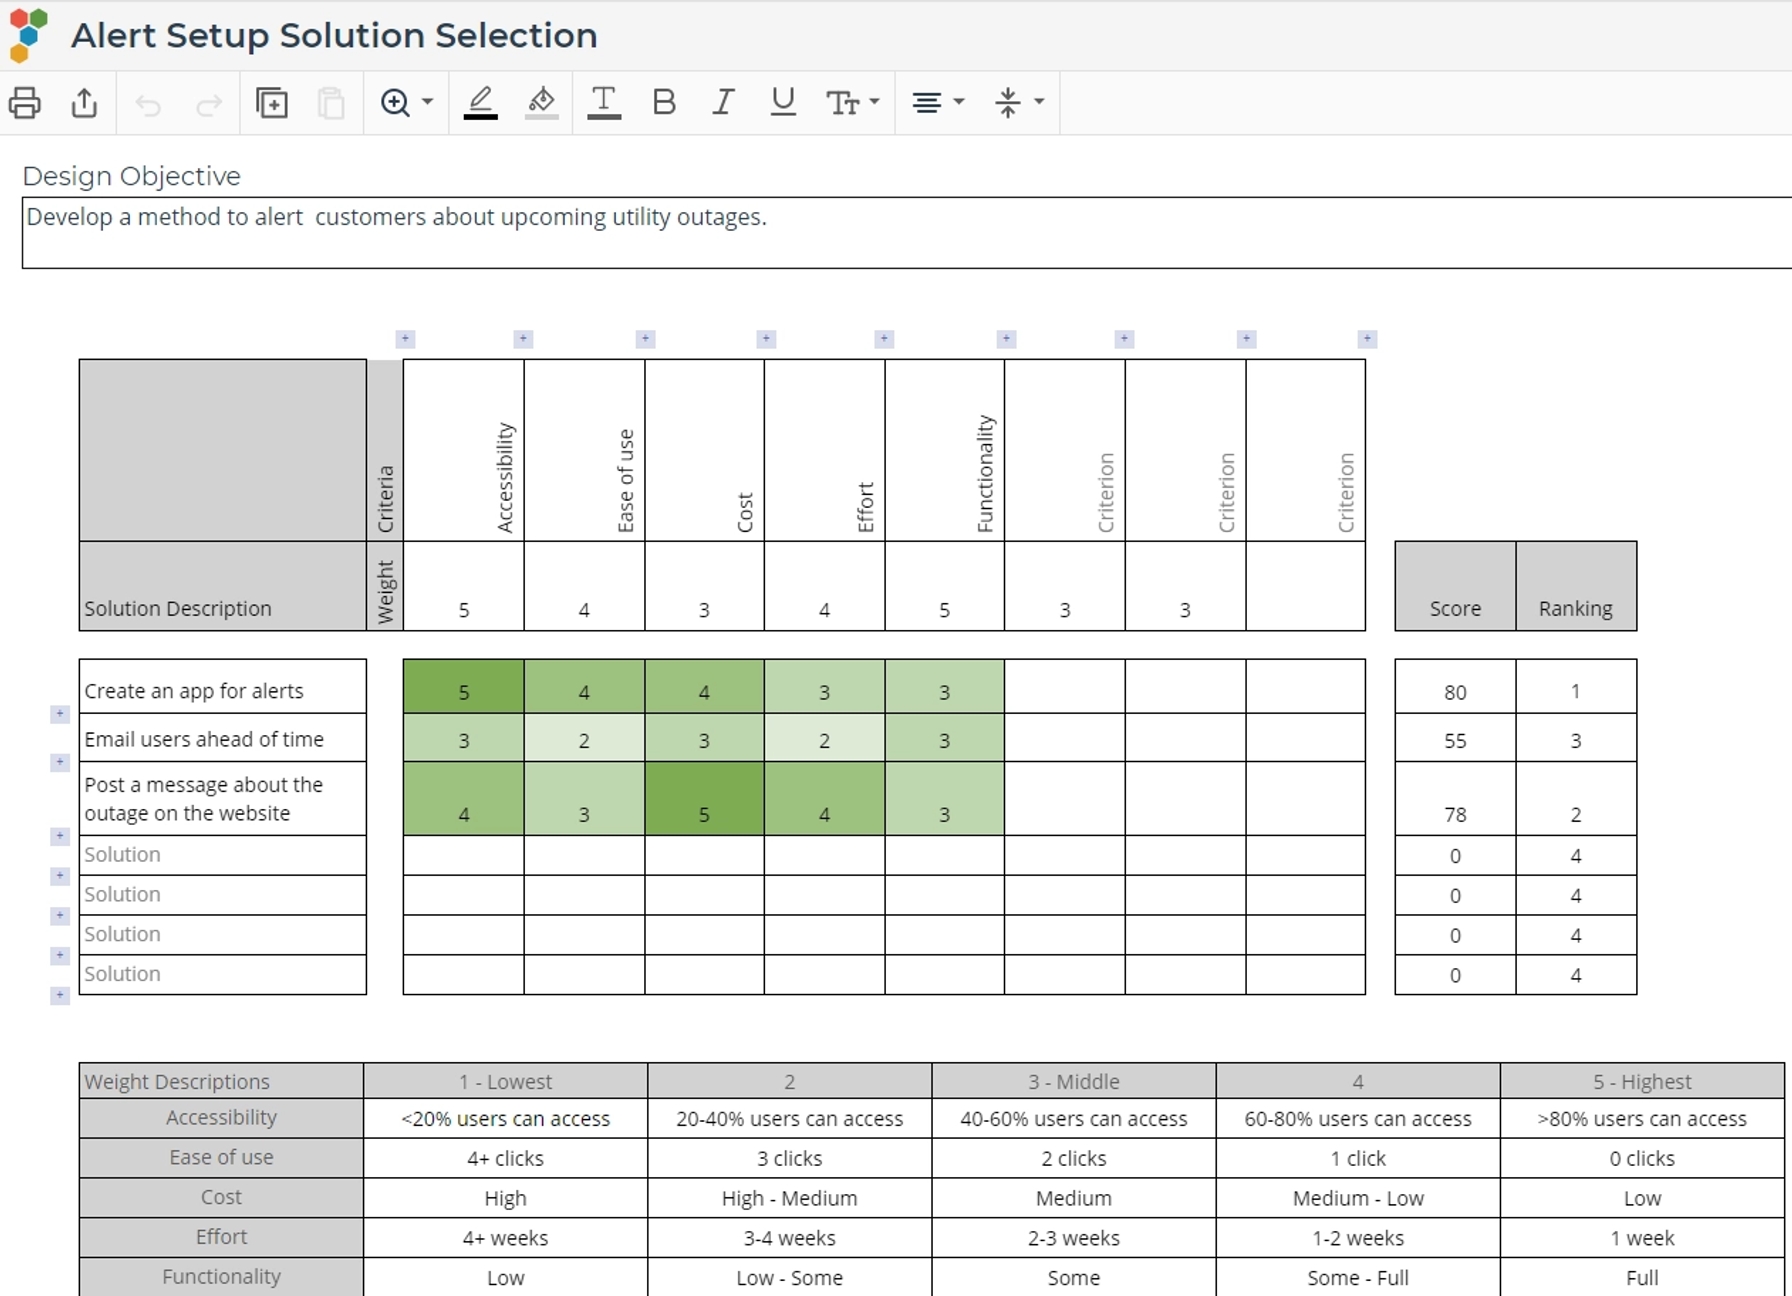 Solution selection template with completed input.